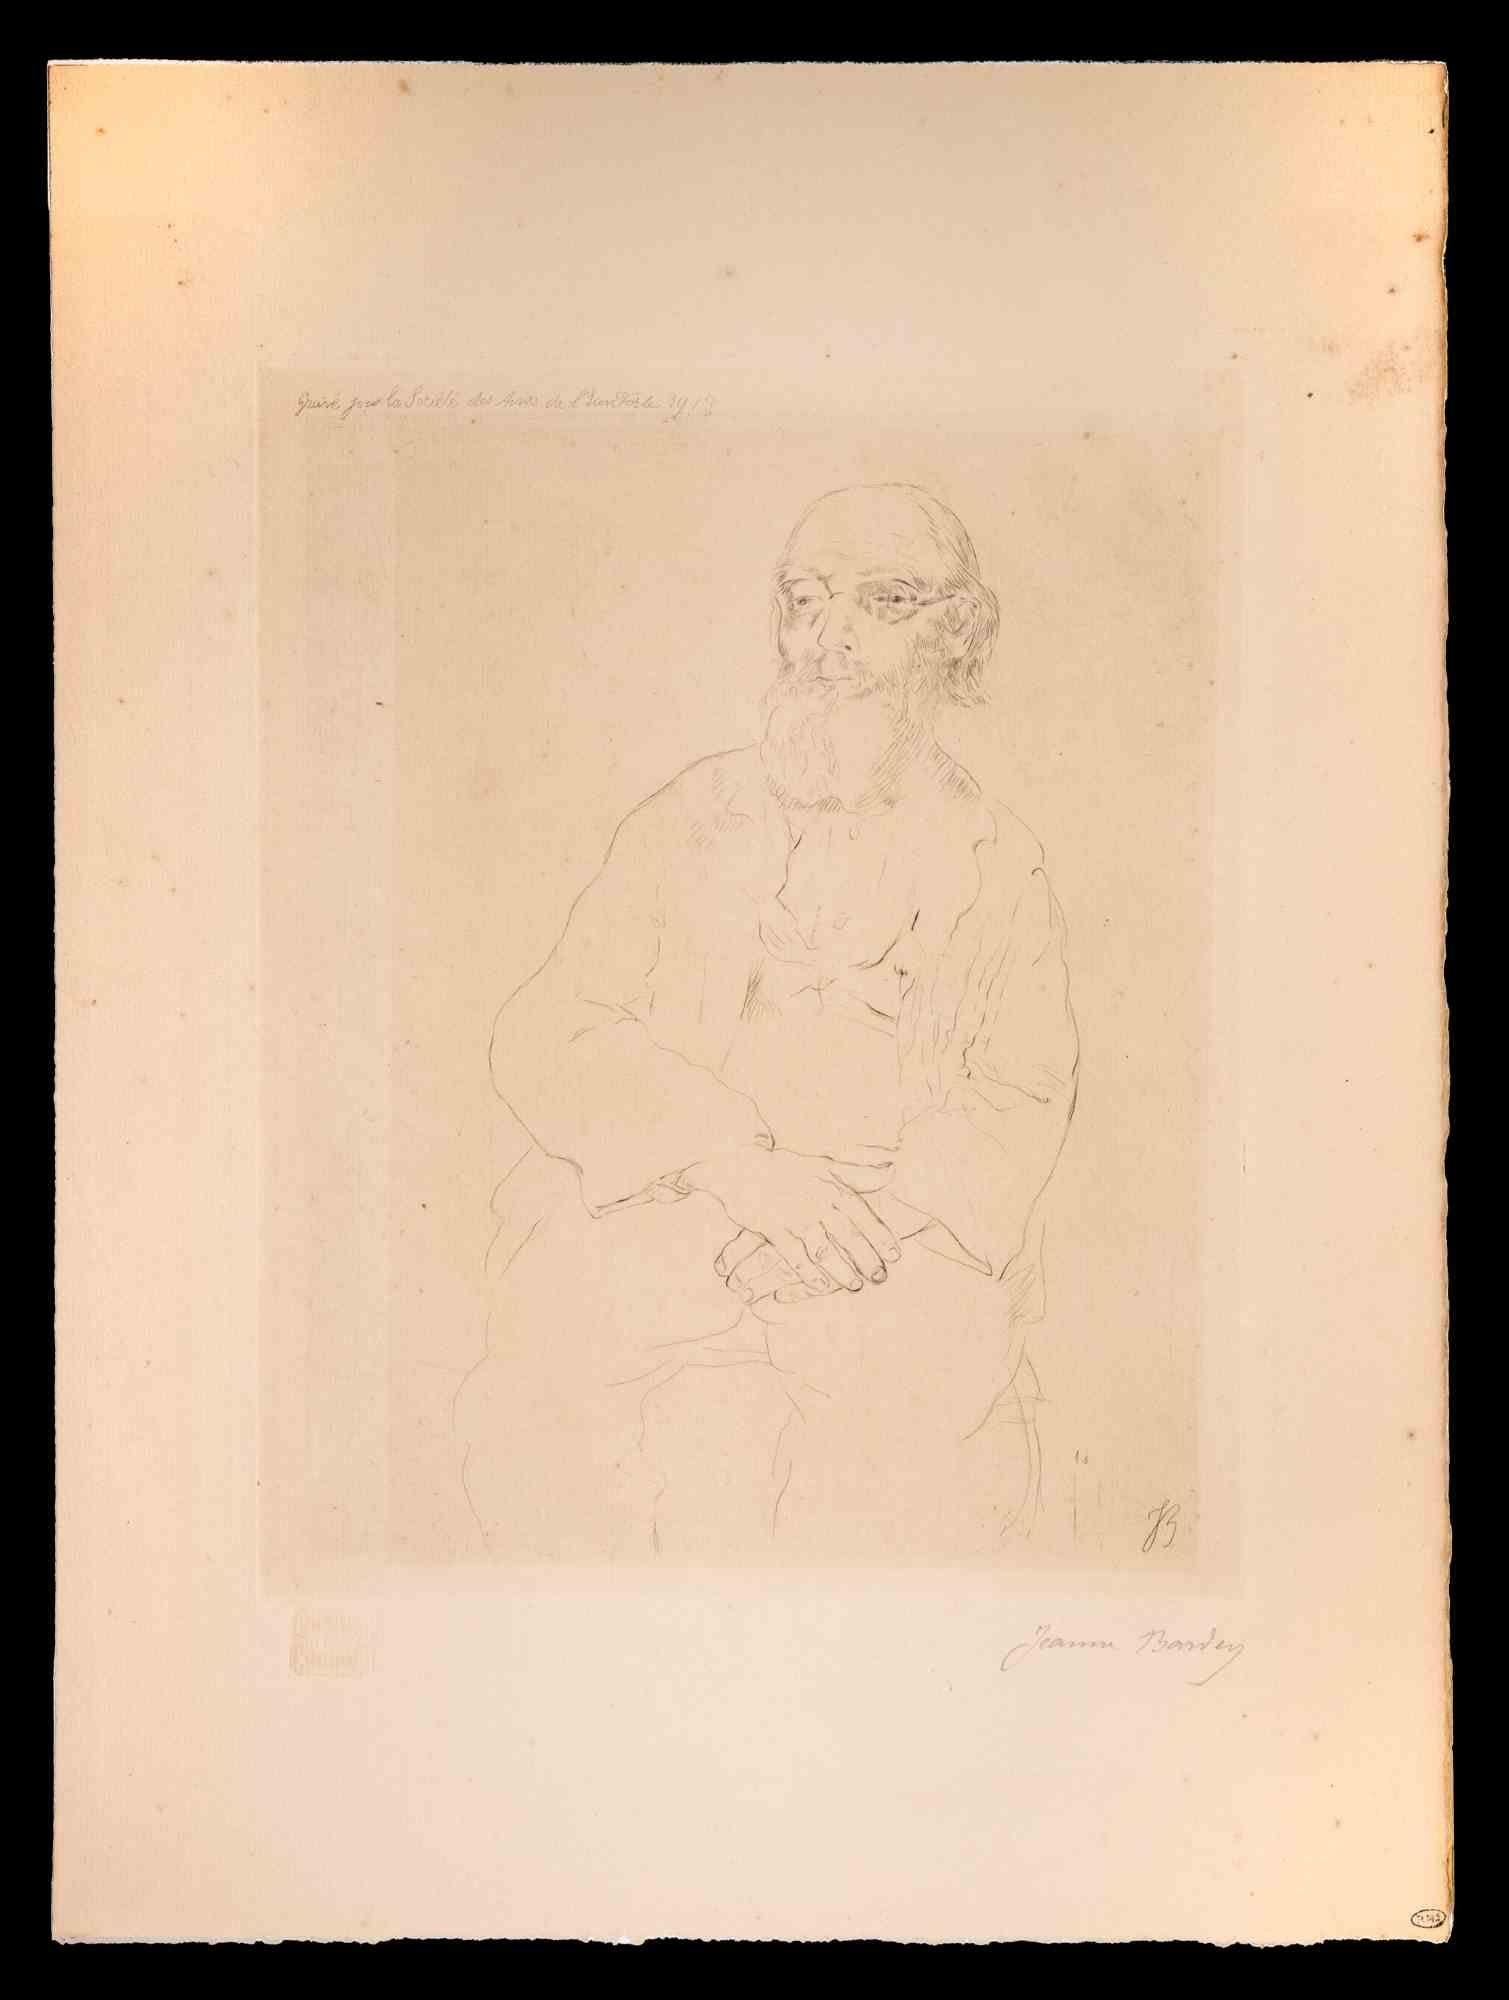 The Old Teacher of Philosophy is an original artwork realized by French Artist  Jeanne Bardey (1872 - 1954)

Drypoint print. Hand-signed on the lower right in pencil, on up dated 1913 s., artist proof. Edition "Societè des Arts de l'Eauforte".